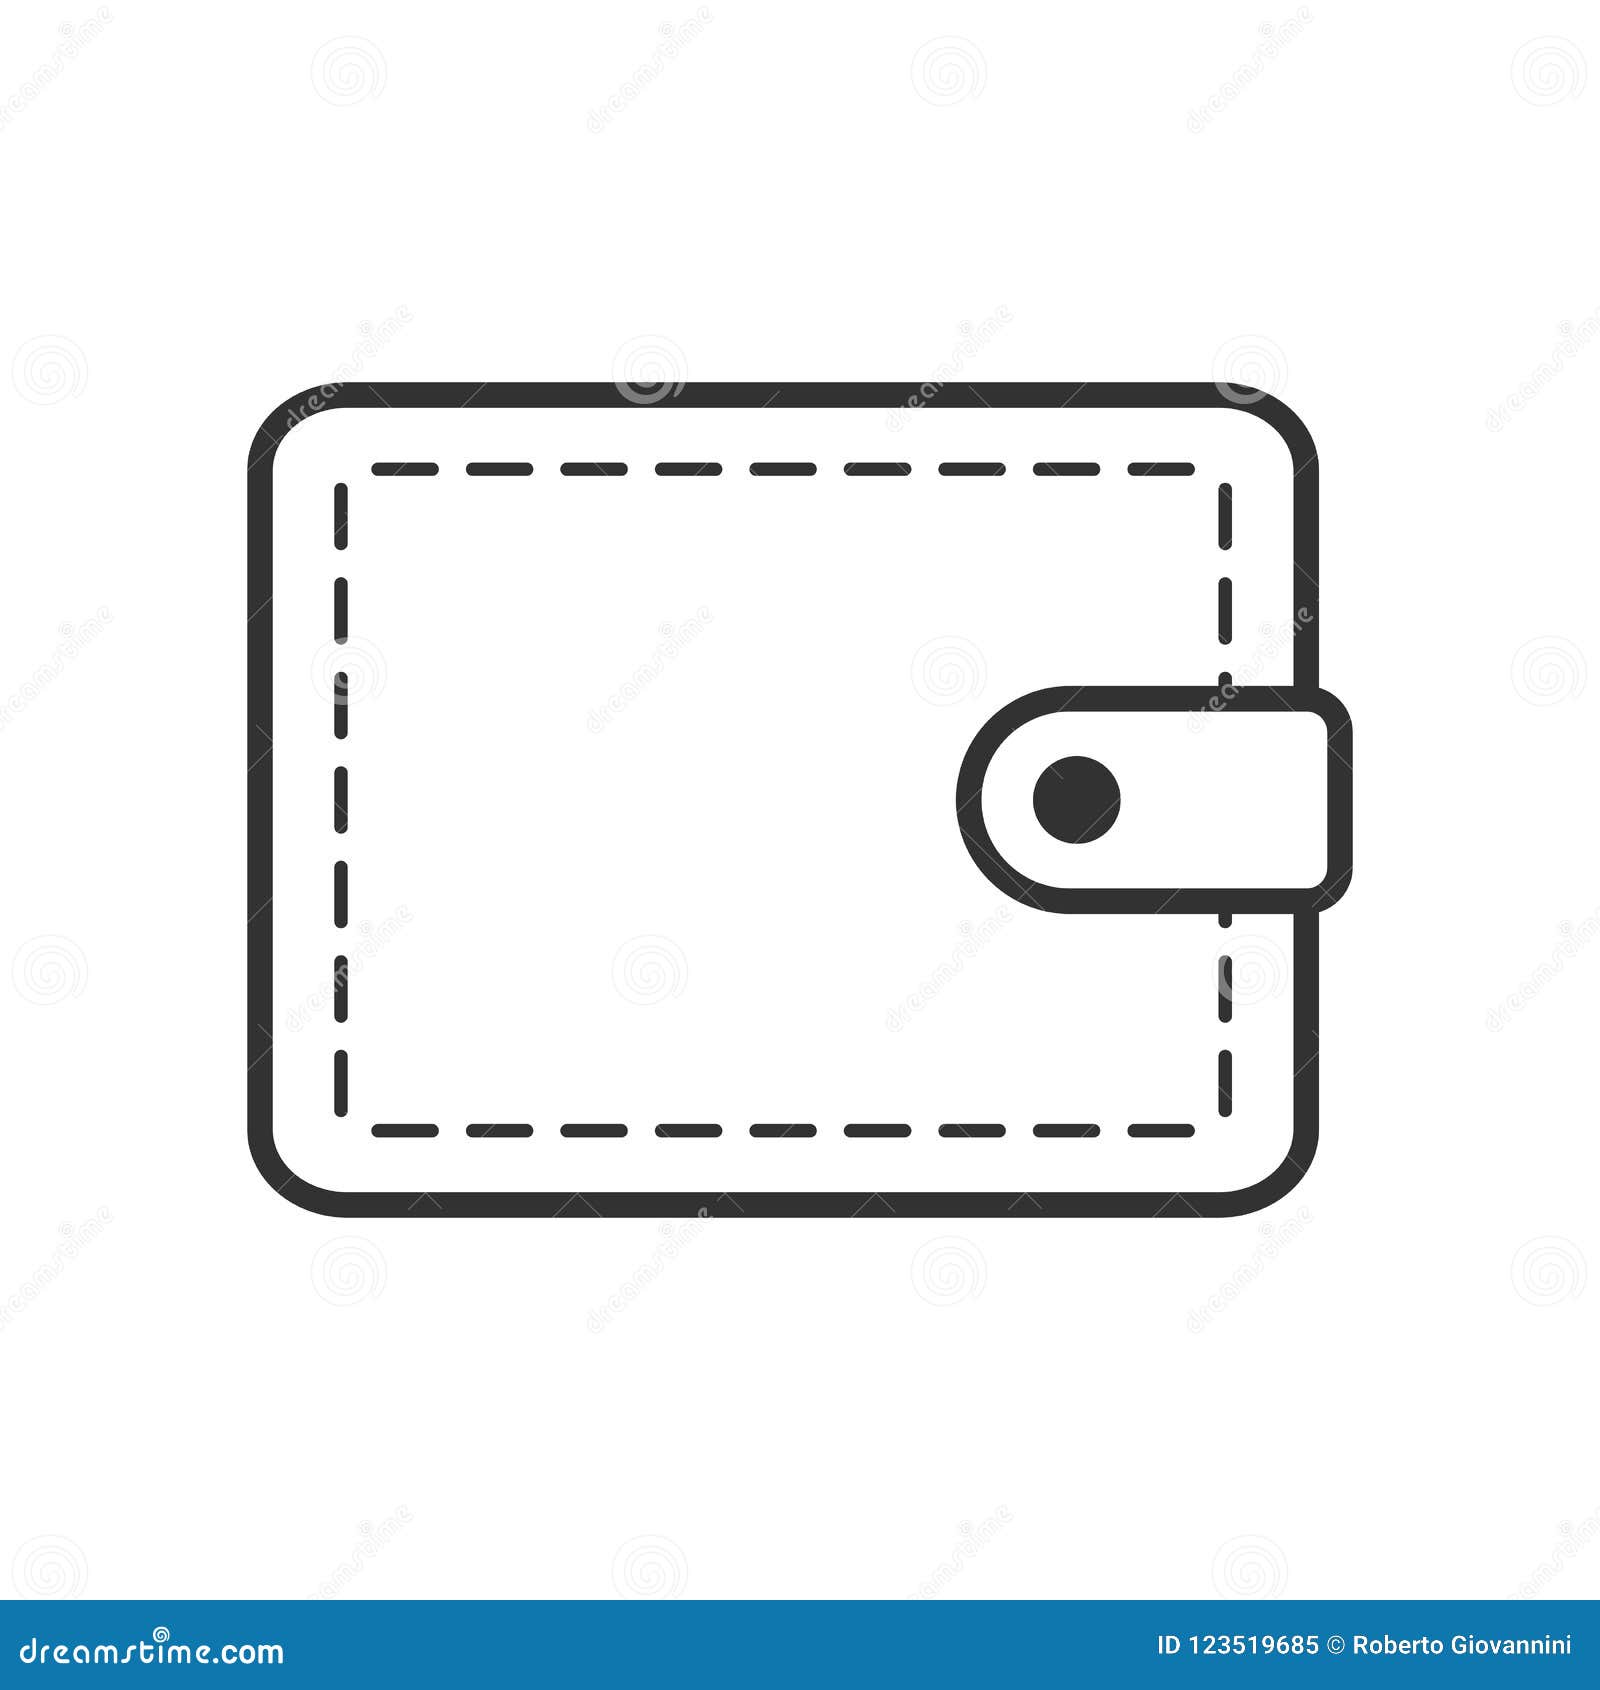 Wallet Outline Flat Icon On White Stock Vector - Illustration of clean, coloring: 123519685